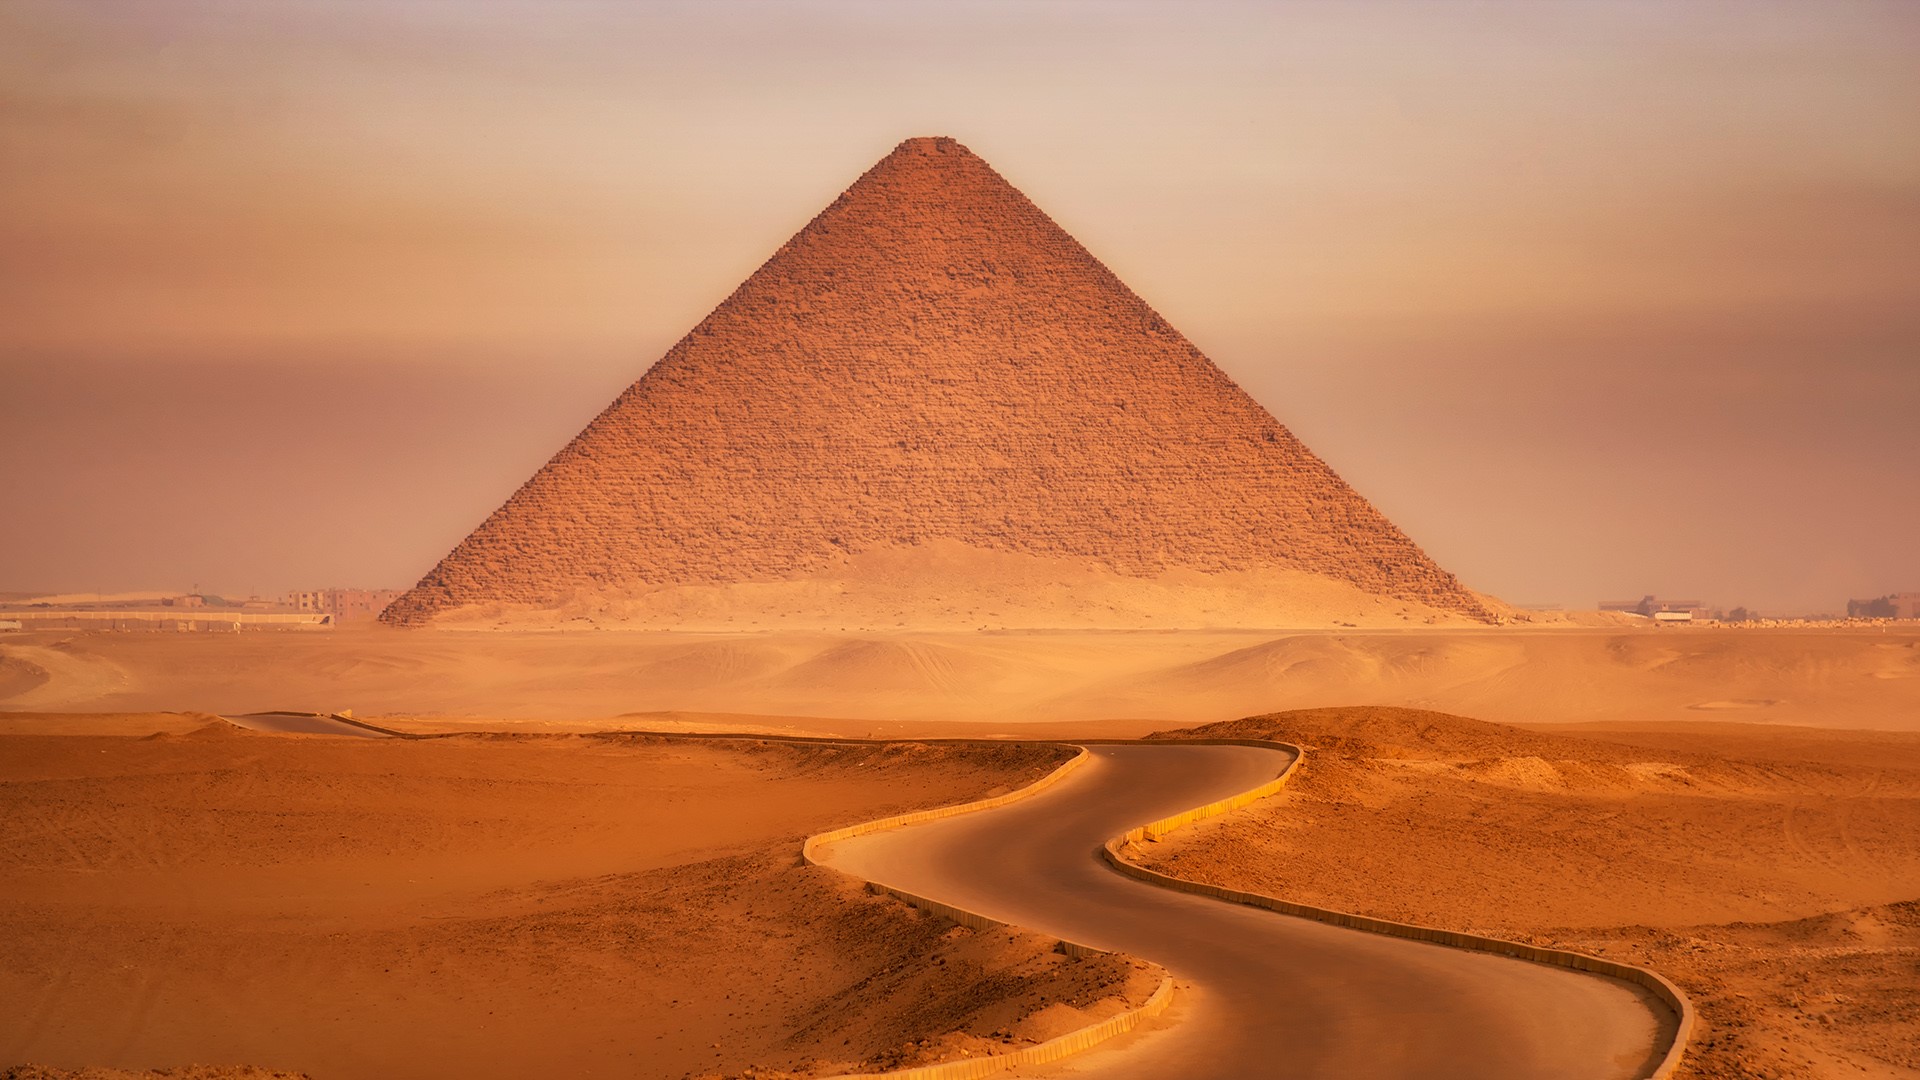 General 1920x1080 nature landscape pyramid sand desert clouds dunes road Cairo Egypt Pyramids of Giza history ancient landmark Africa